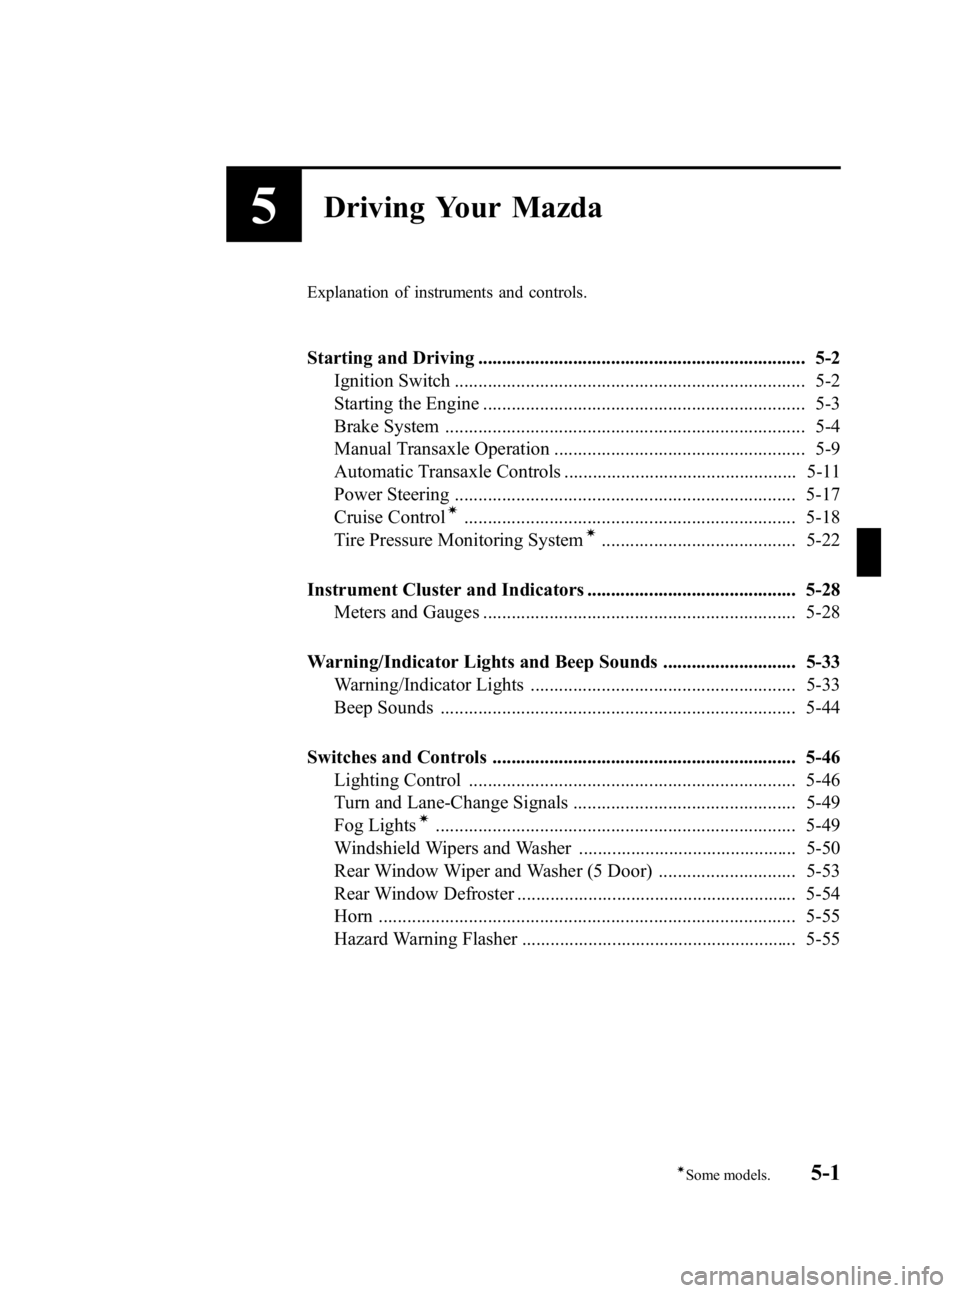 MAZDA MODEL 3 5-DOOR 2006  Owners Manual Black plate (115,1)
5Driving Your Mazda
Explanation of instruments and controls.
Starting and Driving ..................................................................... 5-2Ignition Switch .........